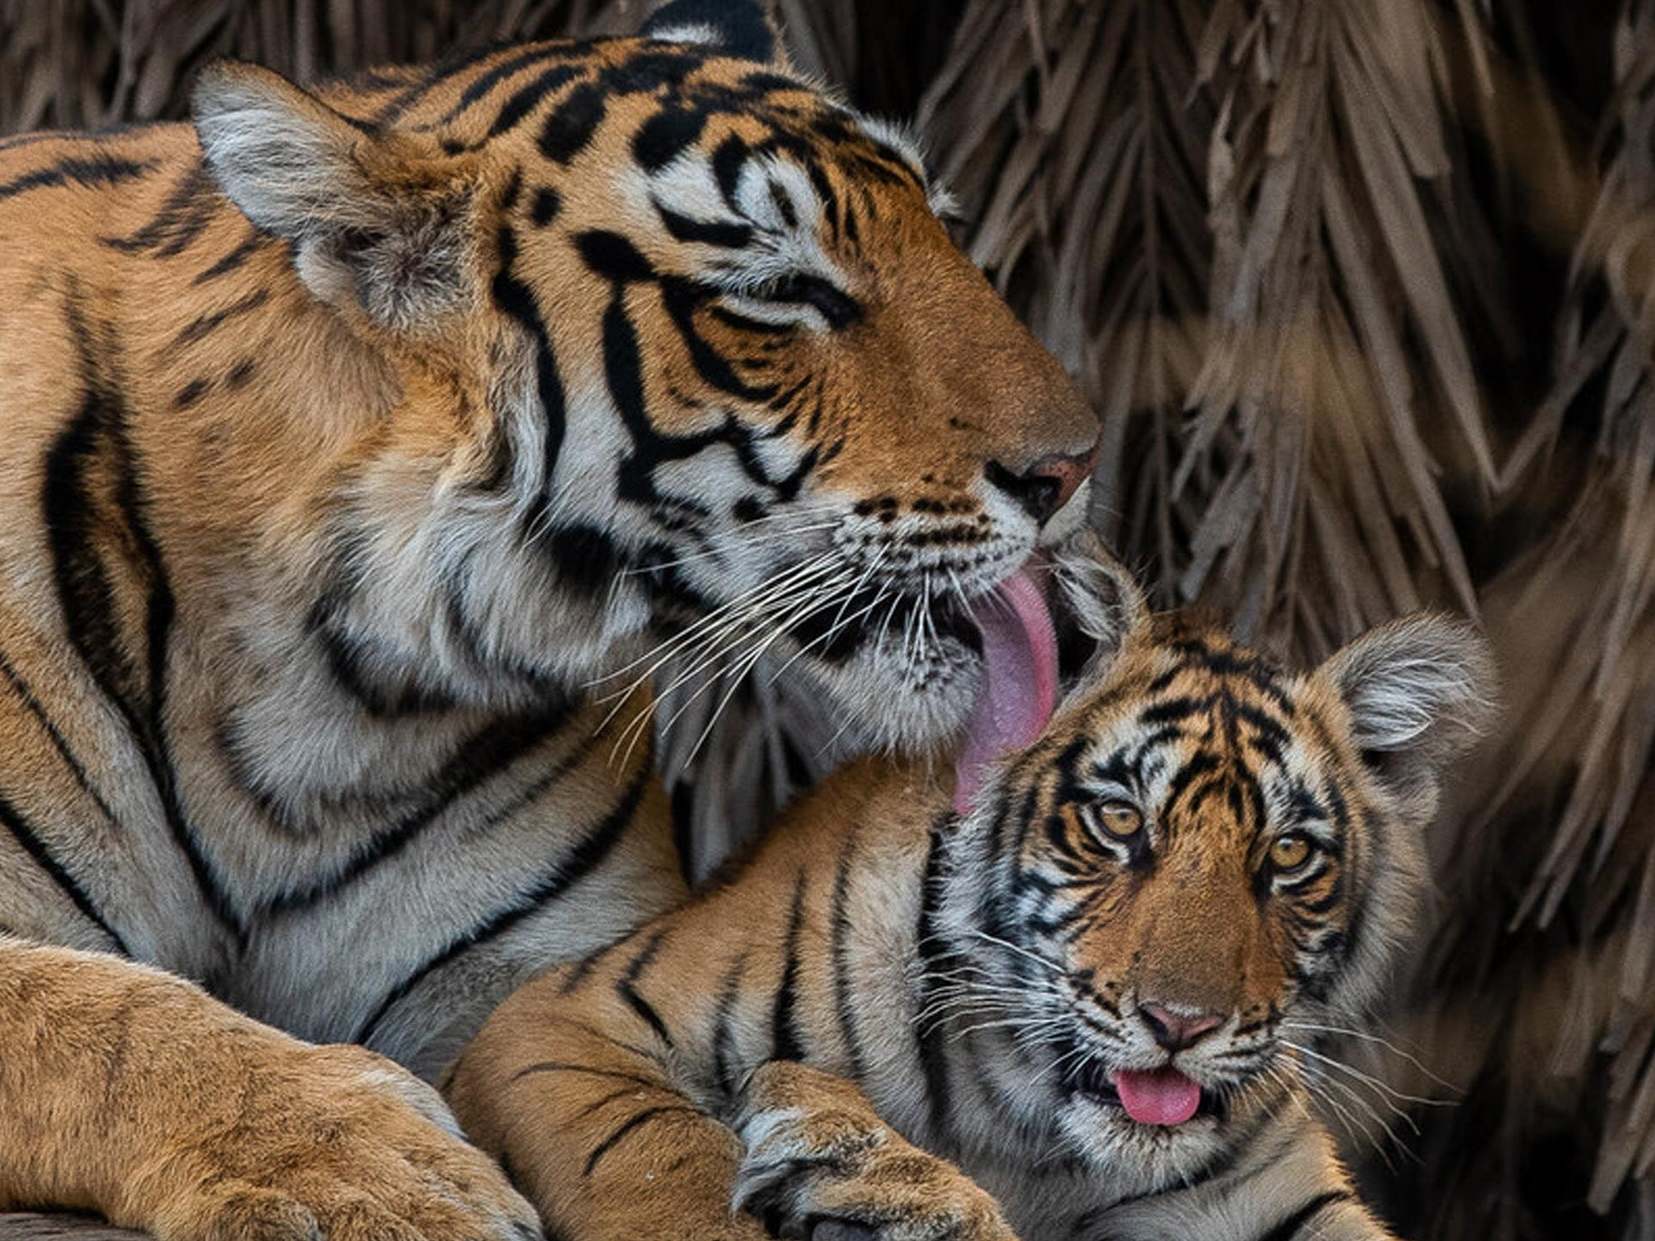 A female Bengal tiger grooms her cub in Ranthambore National Park, India.